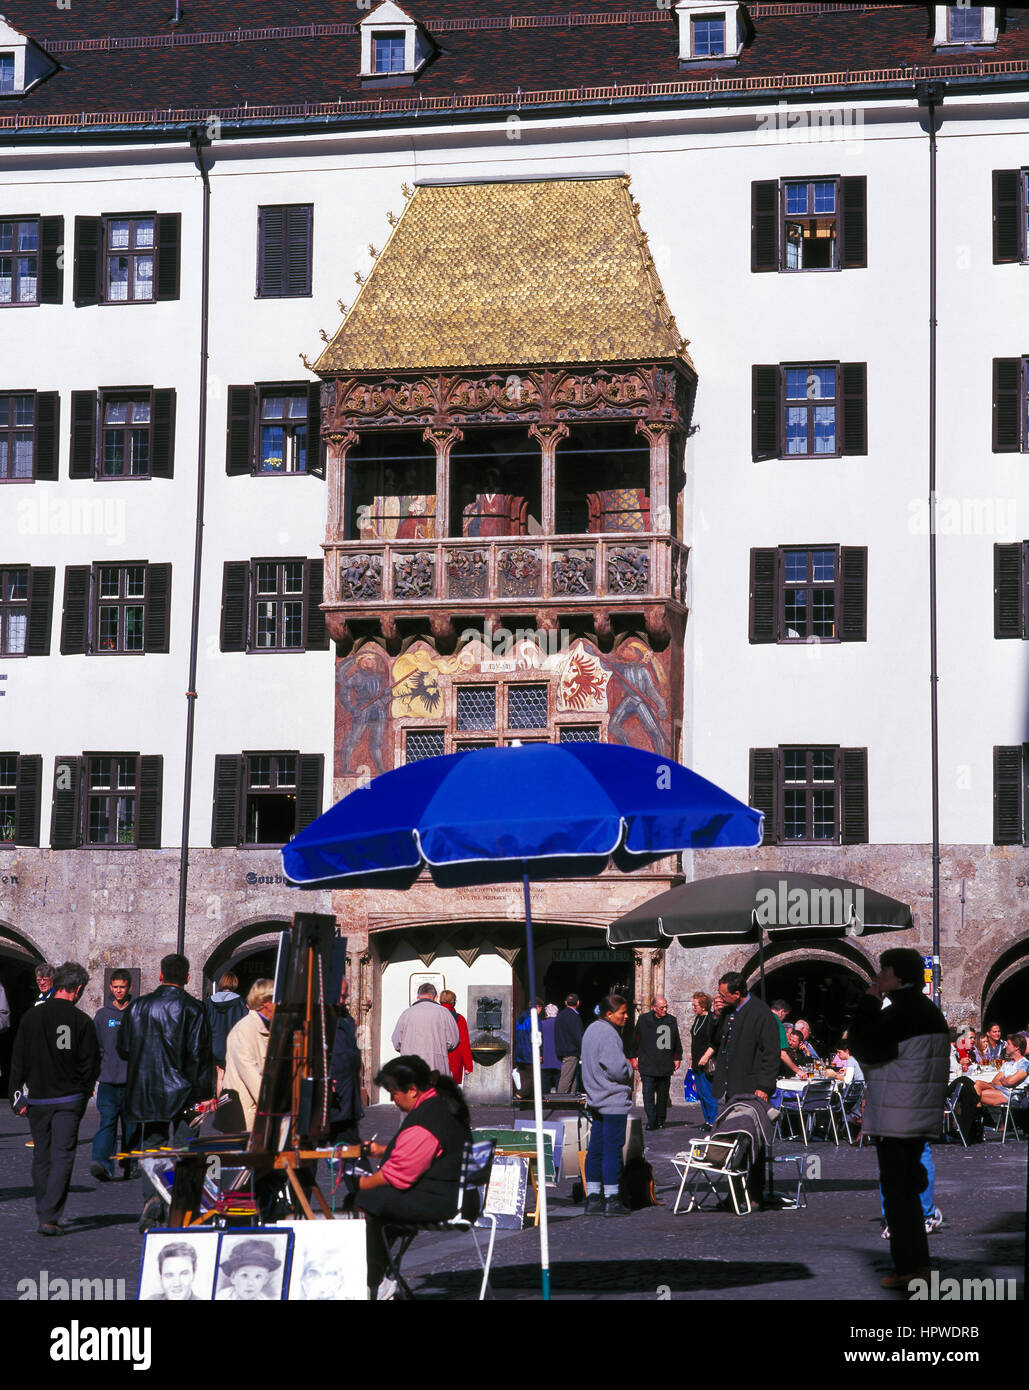 Tourists at a pavement cafe by the famous Golden Roof, Innsbruck, Austria. Stock Photo